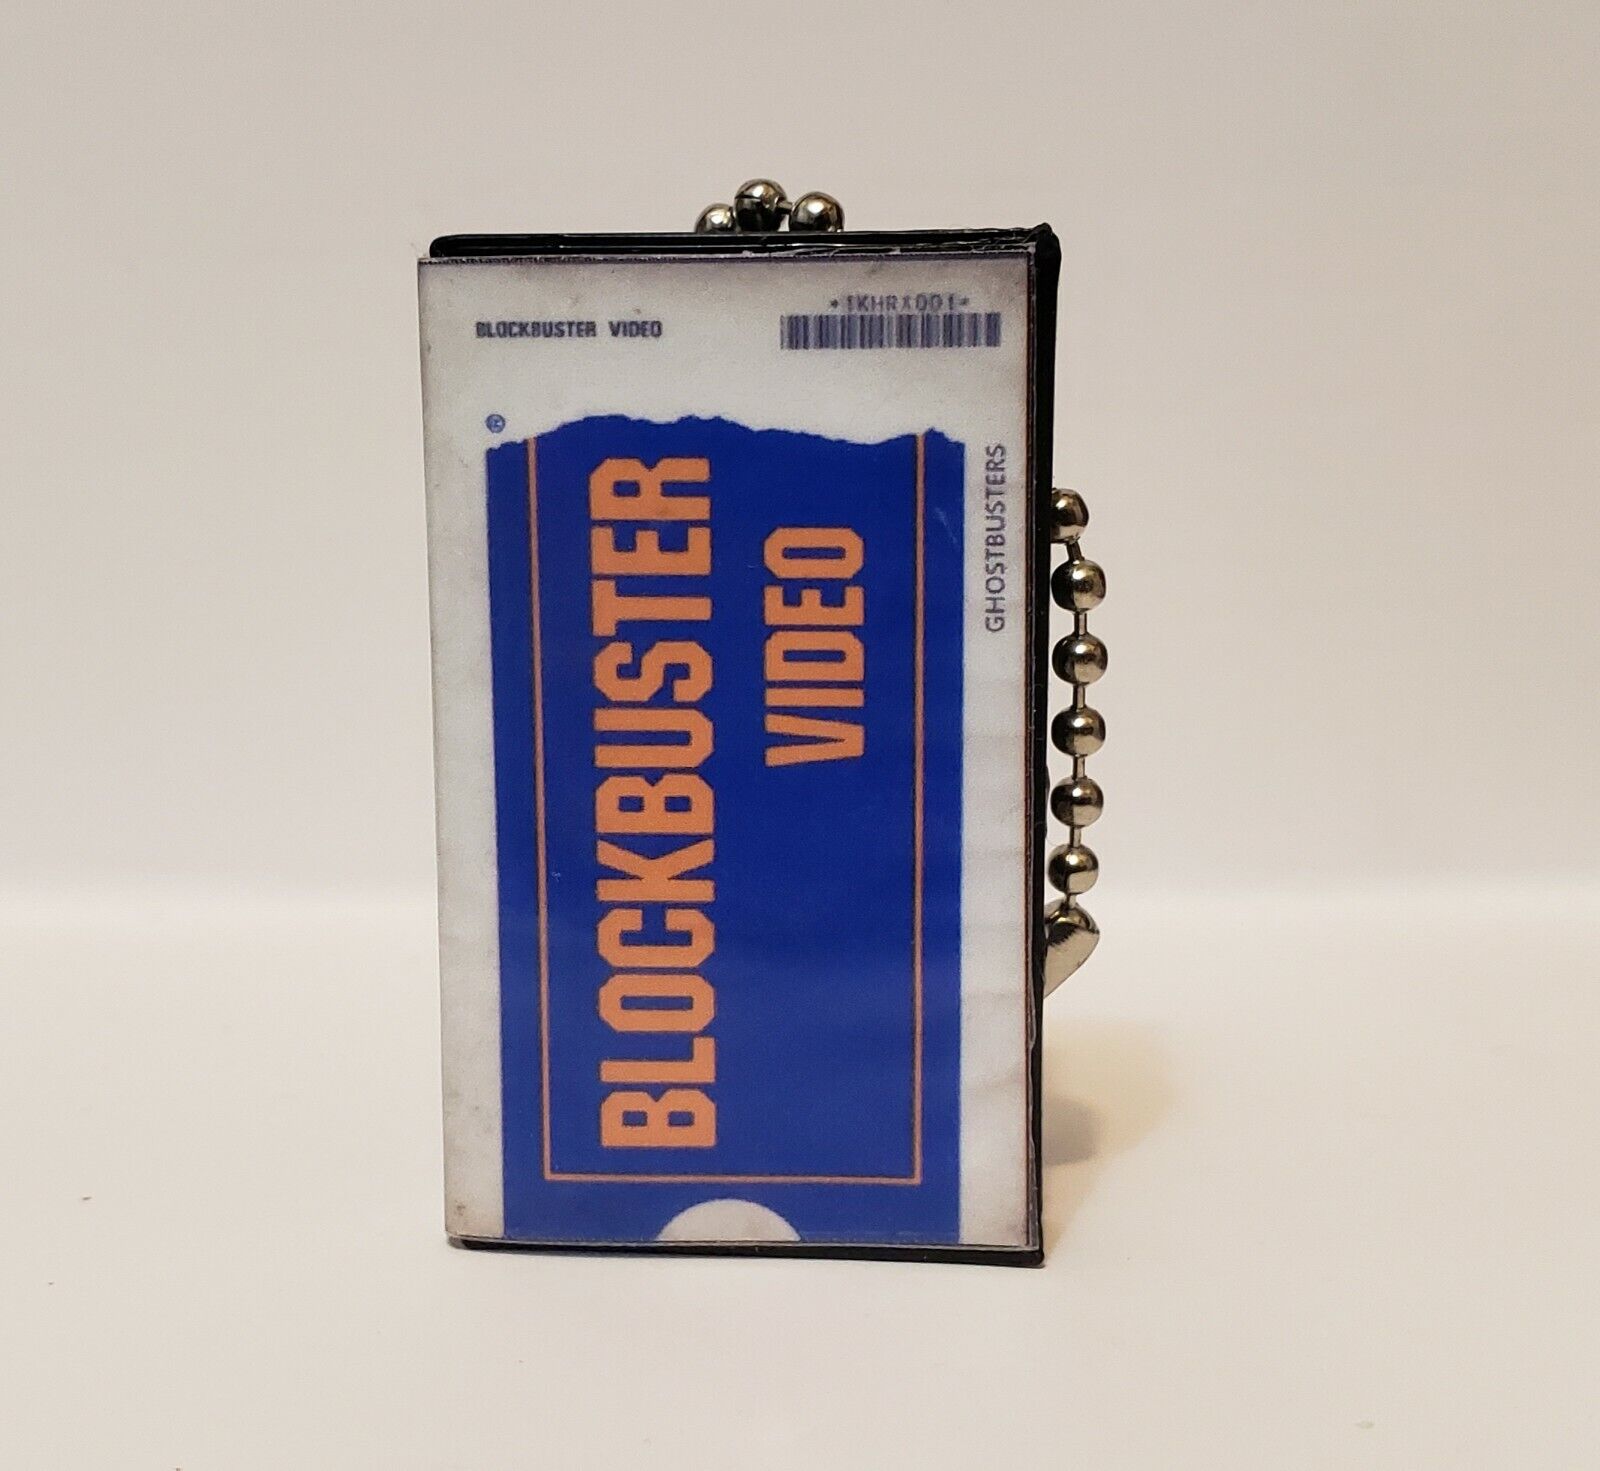 Blockbuster Rental Tape Case Ghostbusters 80s 90s  movie vhs Blu Ray Keychain